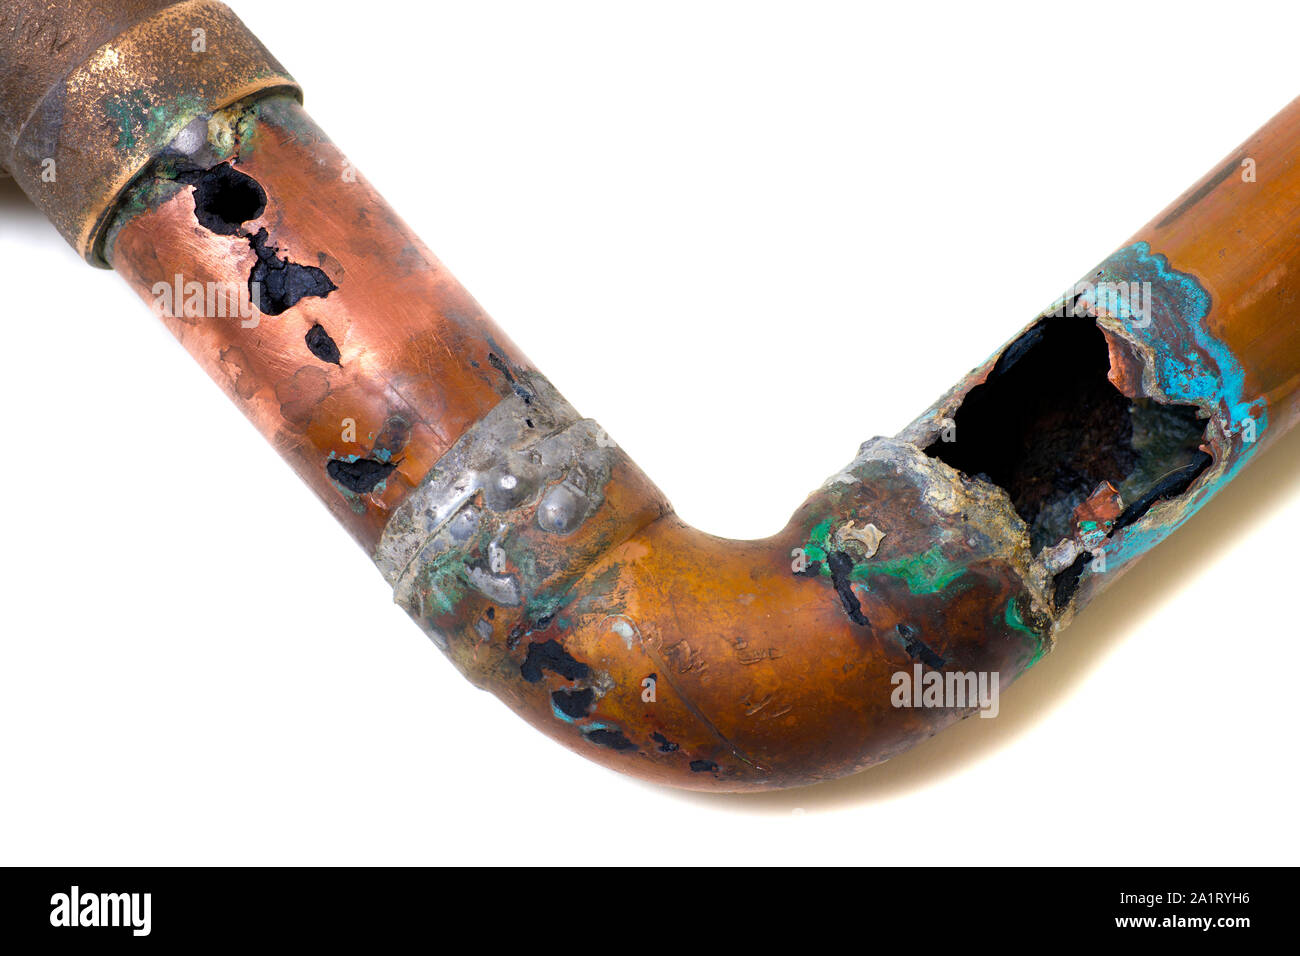 Bathroom Sink Copper Water Drain Line Badly Corroded After 50 Years Of Use